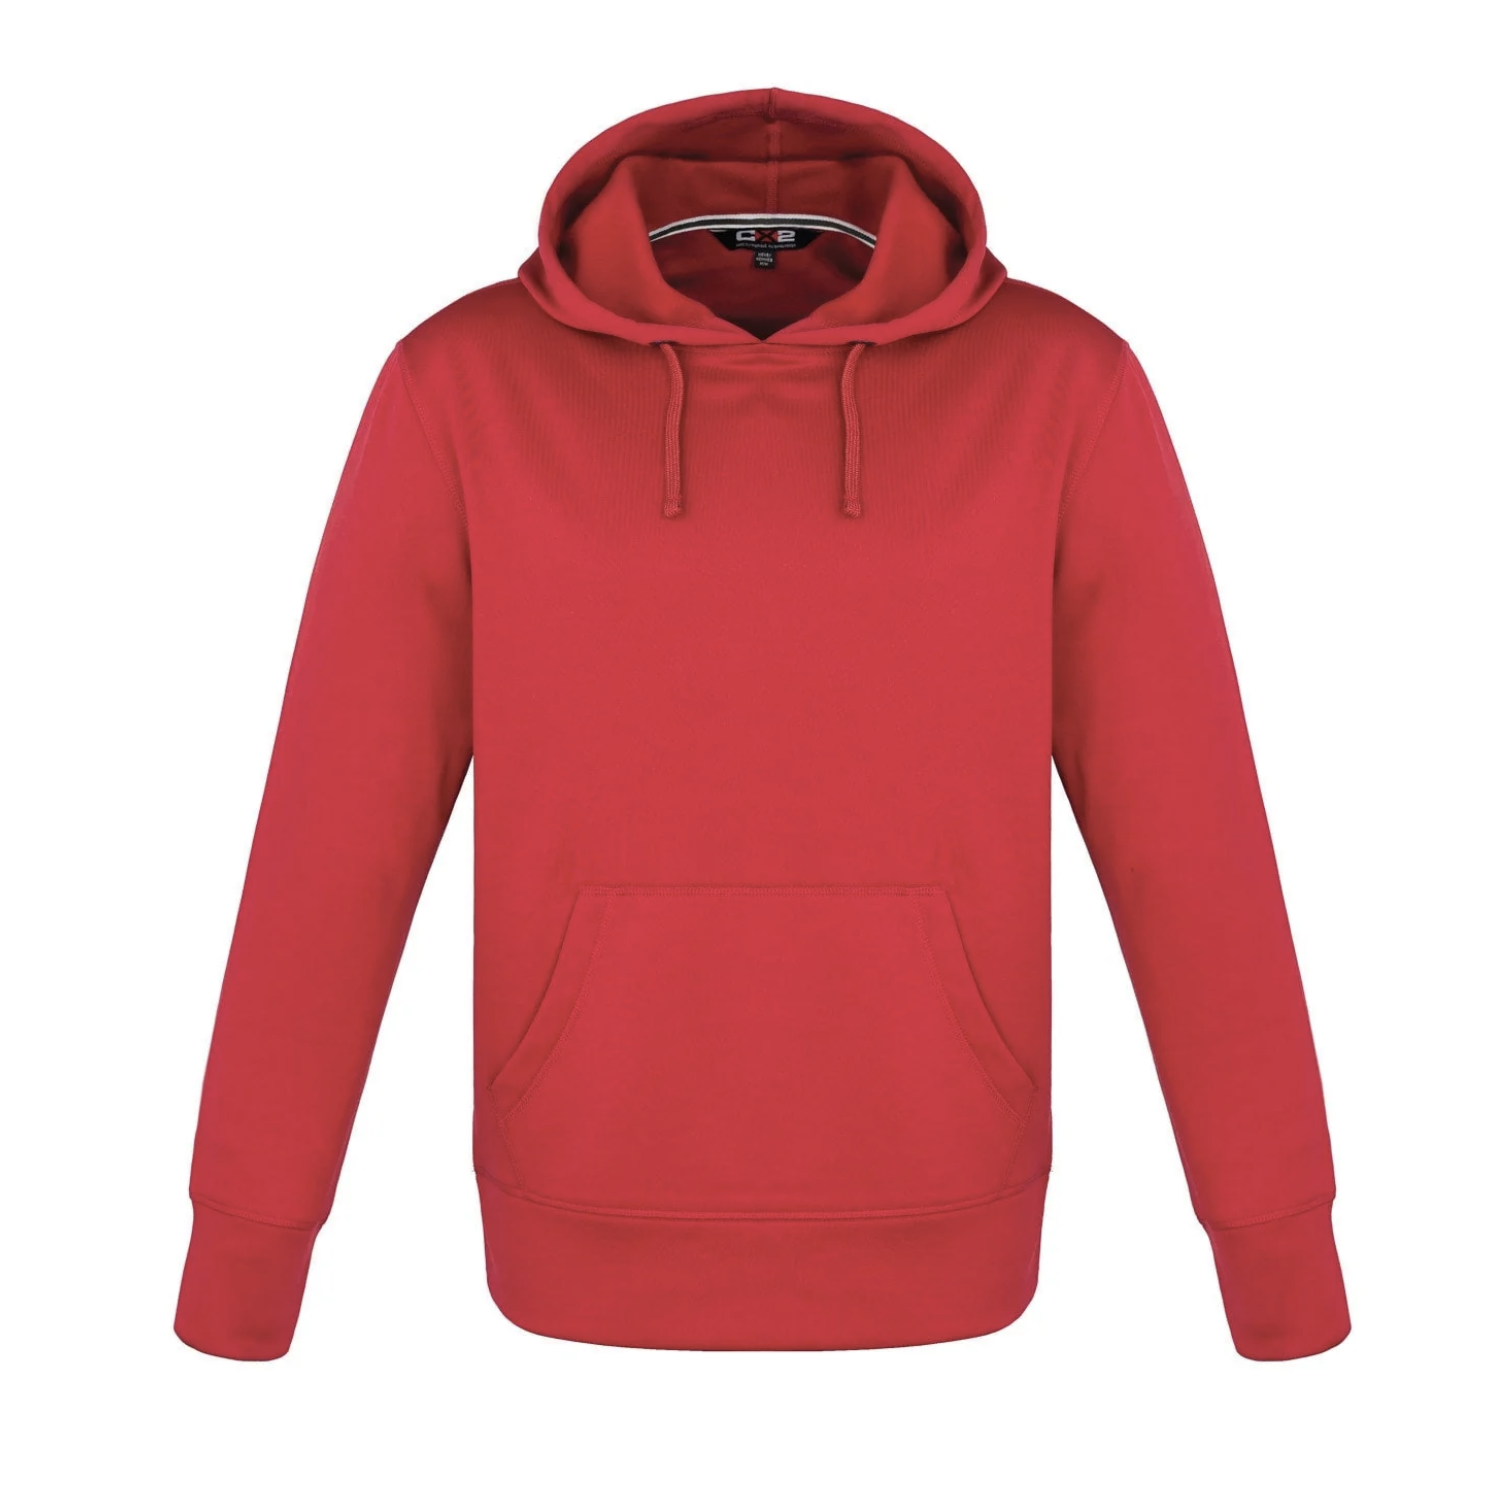 L00687 - Palm Aire - Men's Polyester Pullover Hoodie